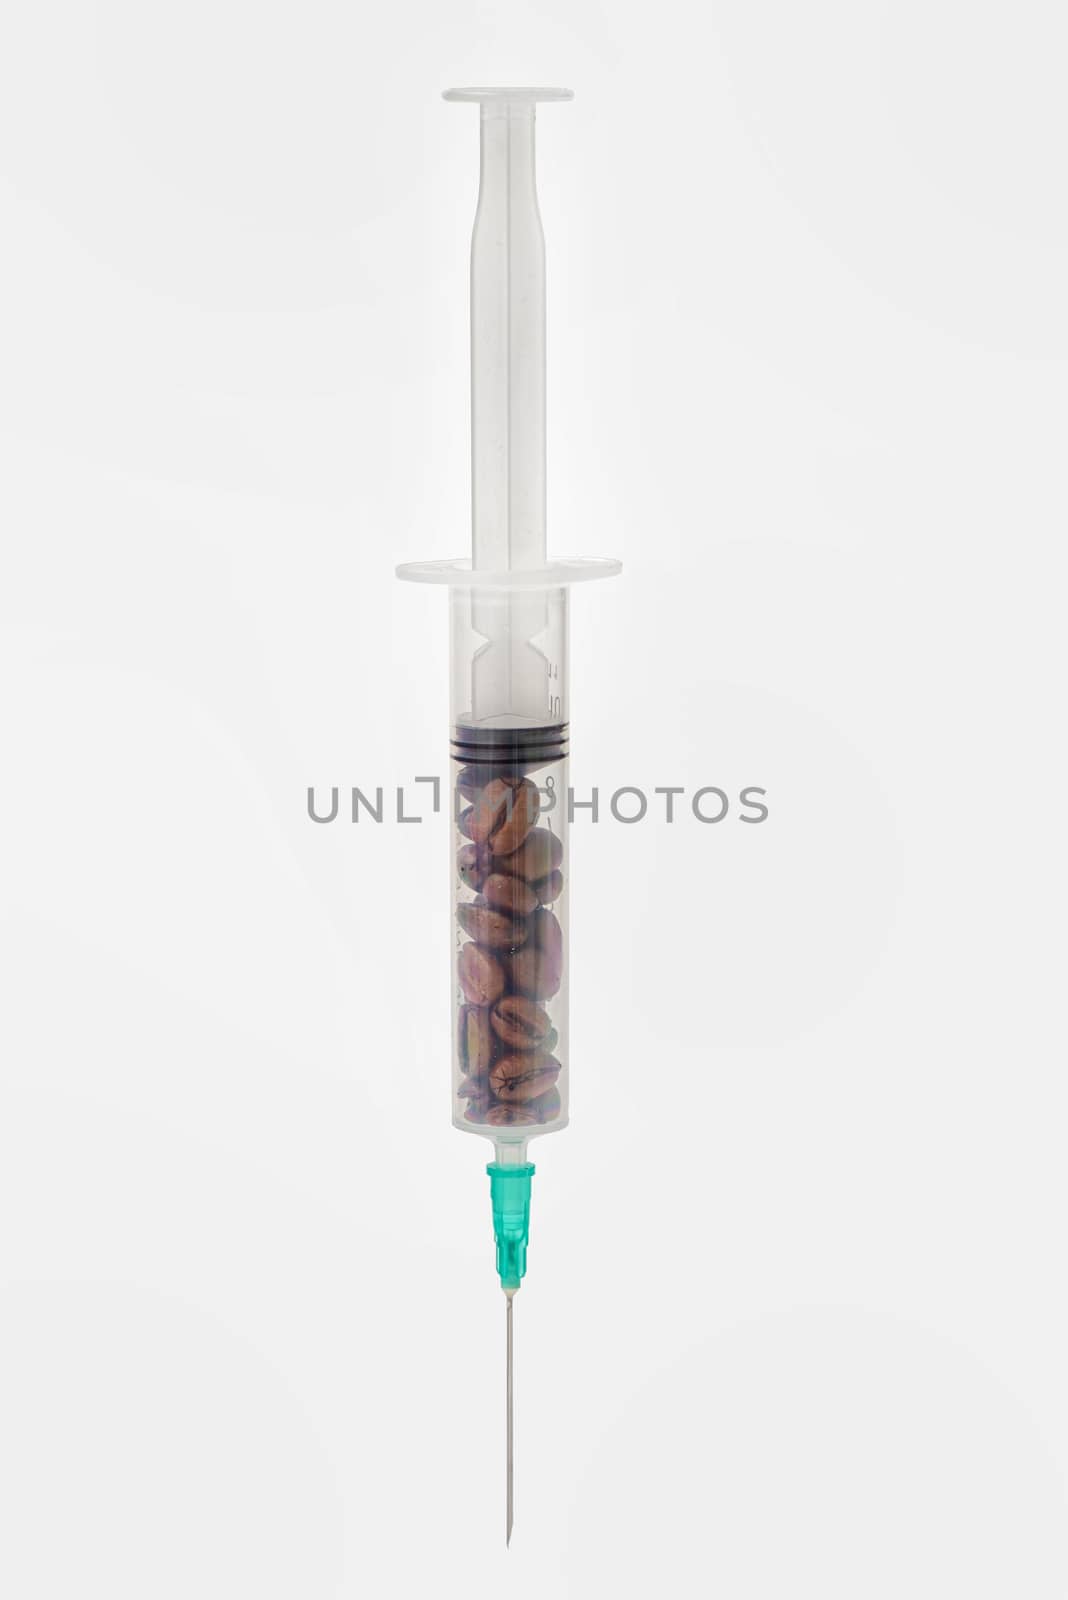 Coffee beans in syringe by mady70